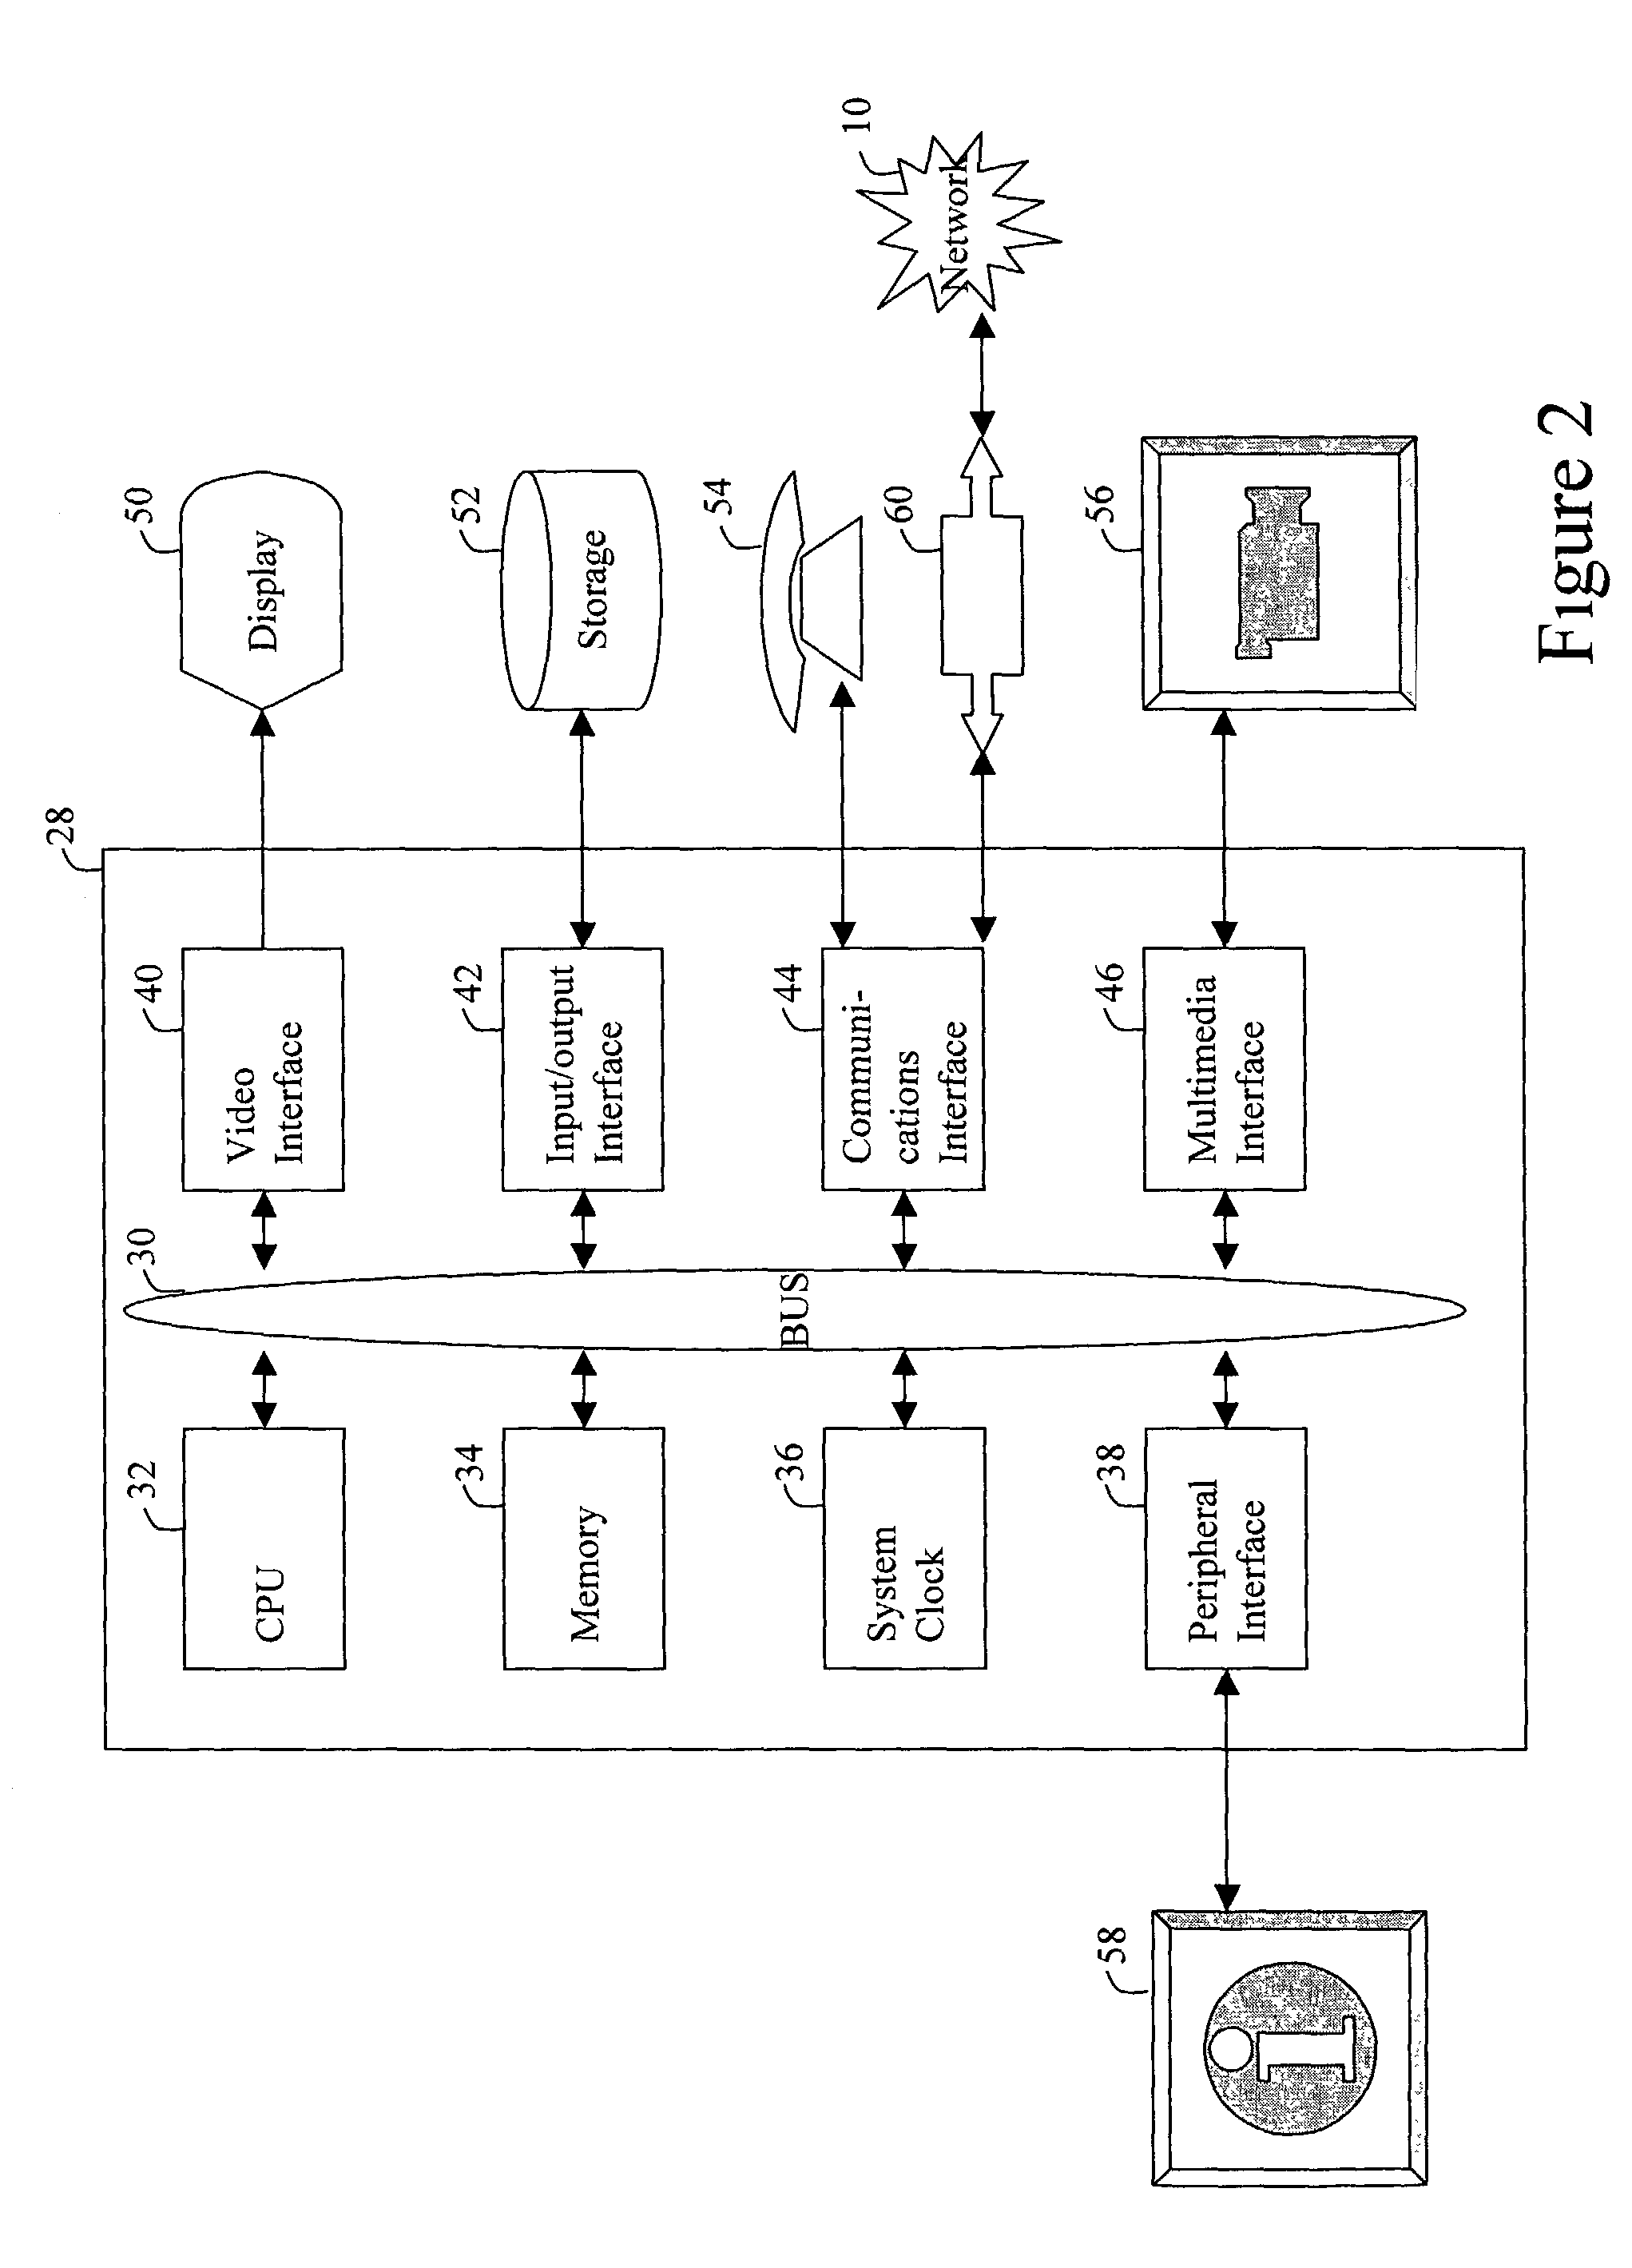 Method and apparatus for making secure electronic payments